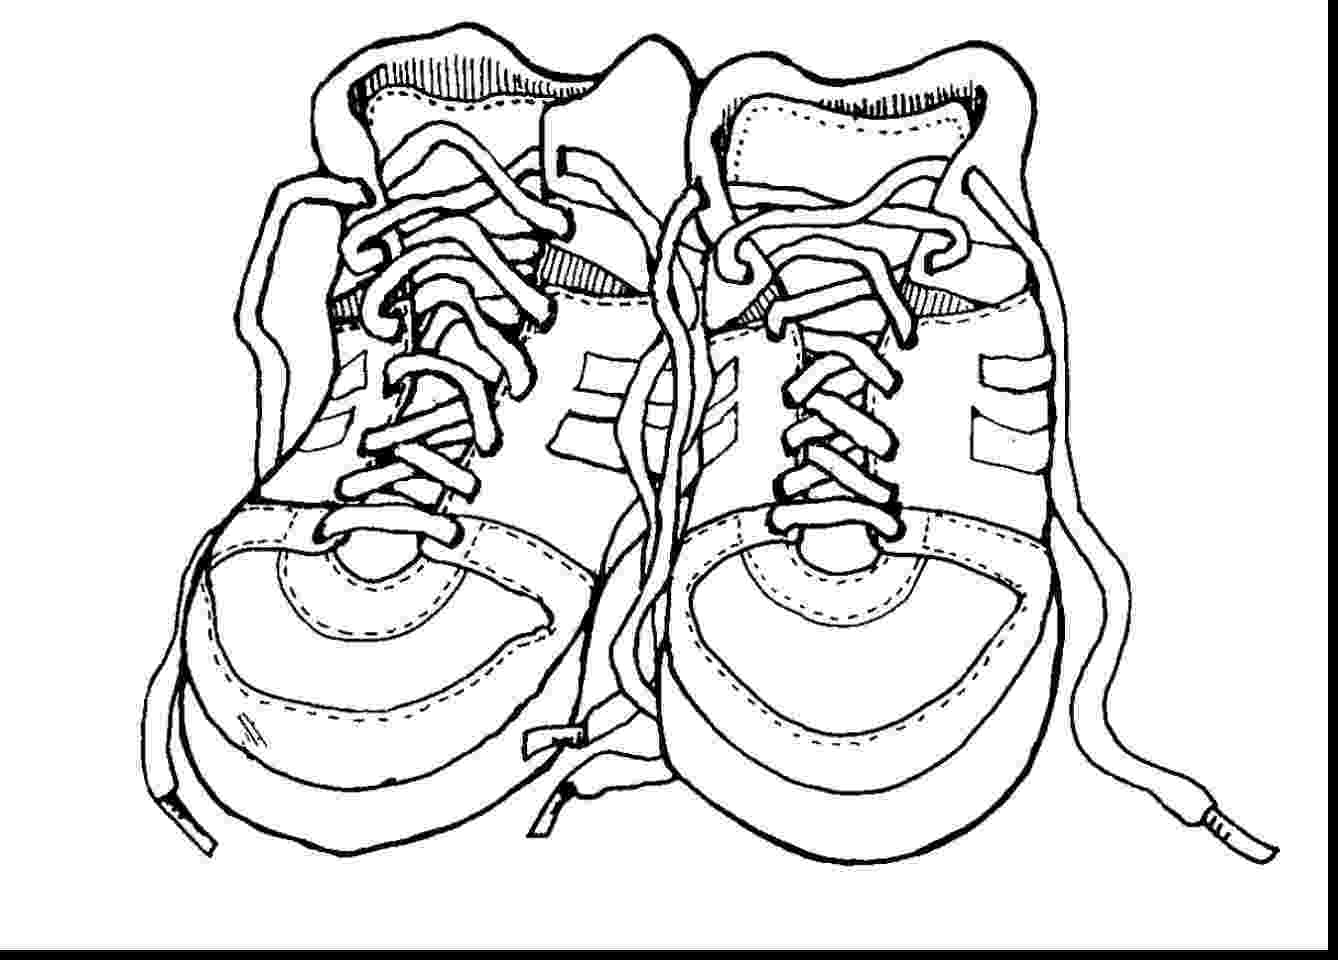 kd coloring pages kd shoes coloring pages at getcoloringscom free pages coloring kd 